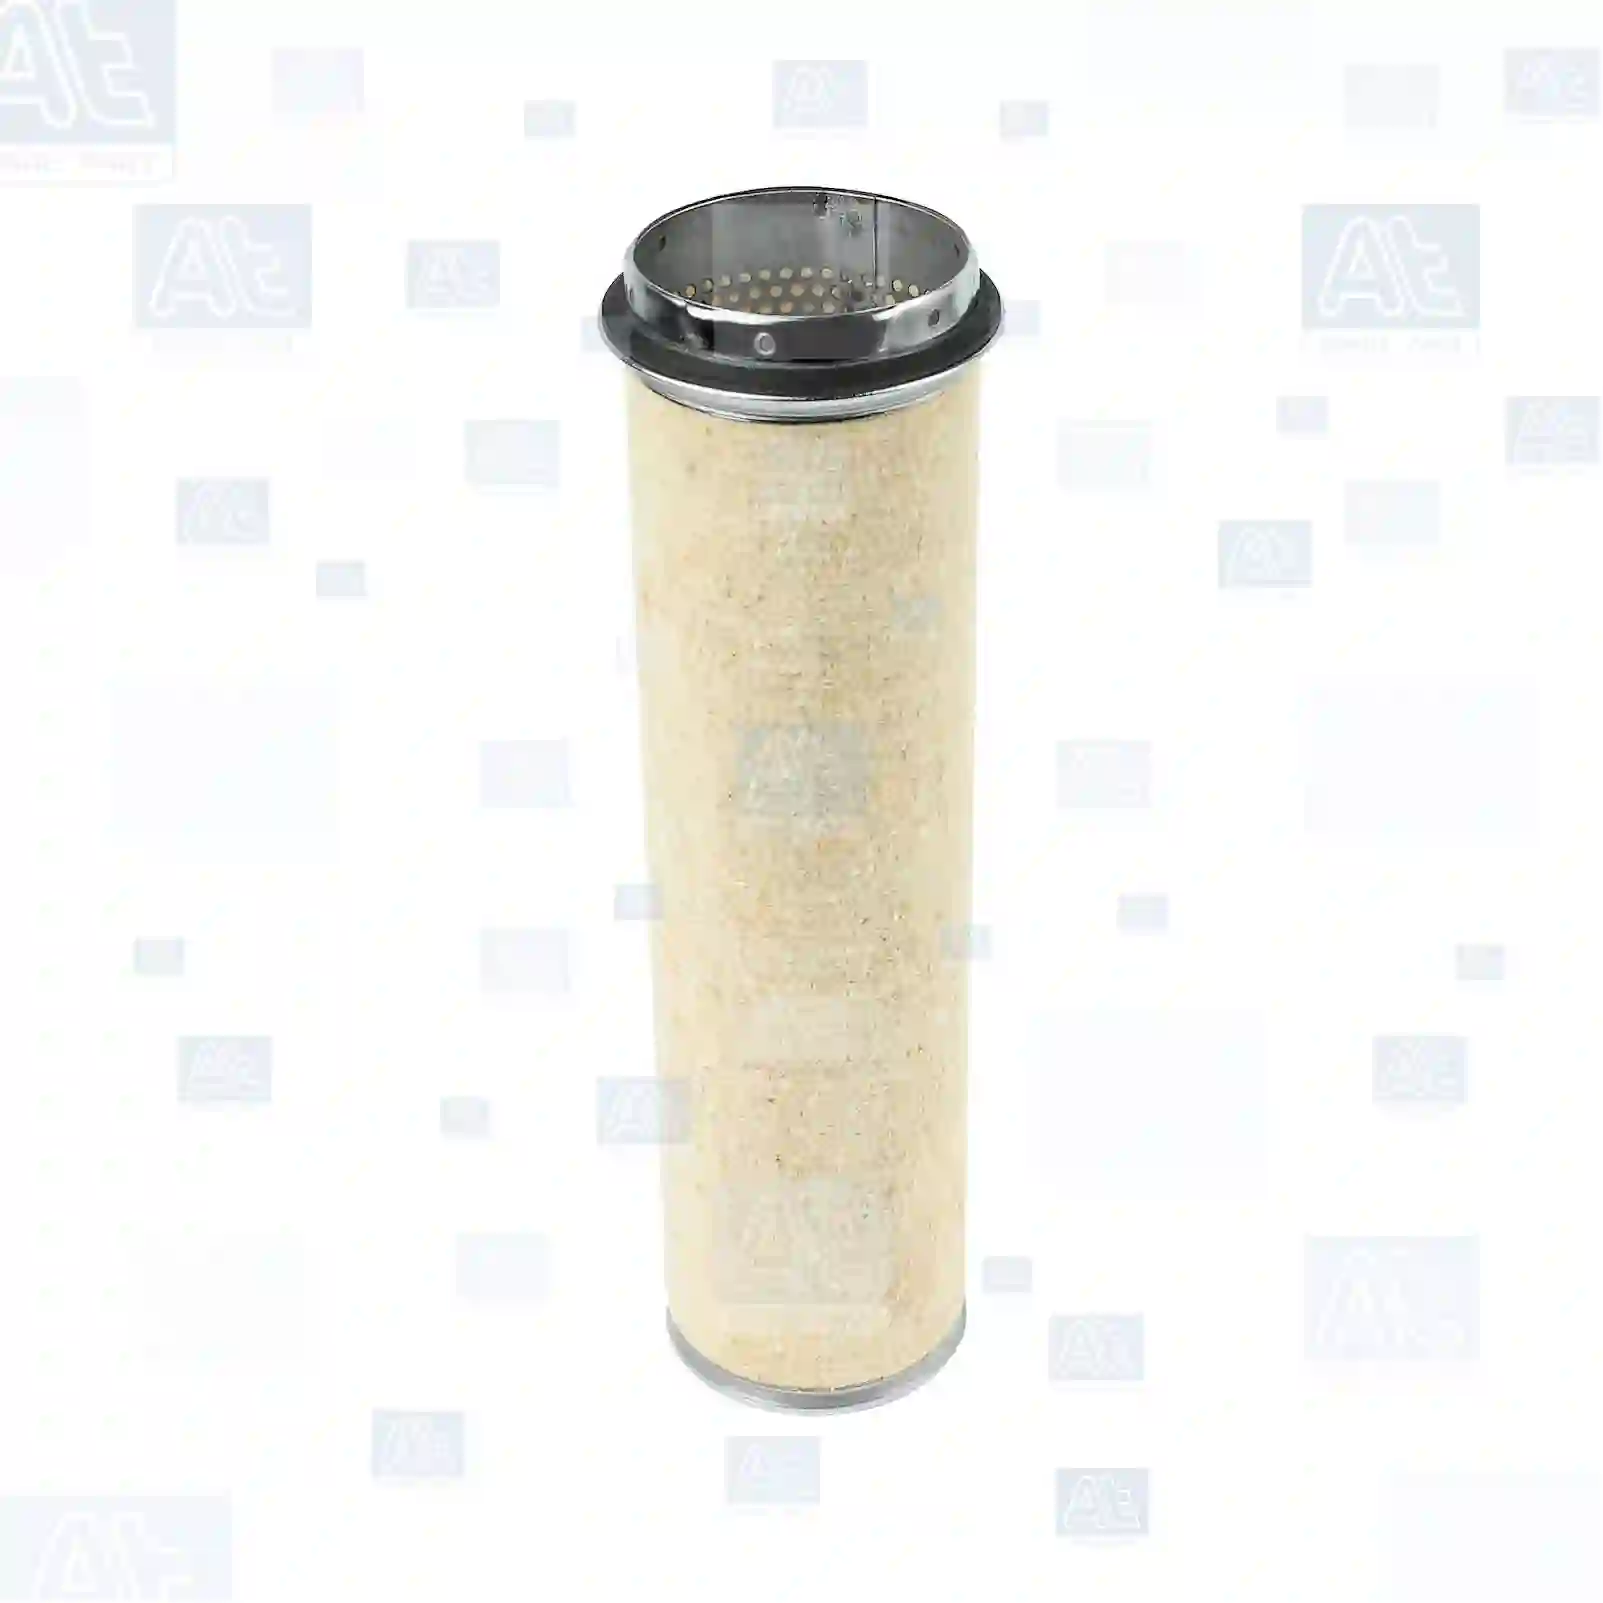 Air filter, inner, 77706170, 8009101117003, 905411510018, 161200190033, 3219421R1, 3219421R14, E155525, 61200190033, 0001761680, 0009400840, 0009420840, 0009420841, 0692380, 3679754, 692380, 13106374, 988595, 98859500, 01902131, 02241329, 1212302023600, 606901670115, 8121918027400, 760884, 1212302023600, 8121918027400, 0746712, 1470630, 4134367, F184230090100, 9839020, 00467138, 01902131, 02241329, 75247063, Y05782010, 467138, 94613437, 0009839020, 3219421R1, 1-3002B182-0, 00760884, 01902131, 02241329, 41AJ58185, AZ30758, PE10011907, 34000490, 02241329, 1212302023600, 8121918027400, 510653508, 7360733, 2191P776695, 04532555149, 62000190702, 81083040085, 81084050012, 0020943204, 3440947304, 3450947004, 605412970057, 606901670115, 3219421R14, 161200190033, 3219421R1, 760884, 93219421R1, 850545, F0850541, F0850545, F850541, F850545, 5000802477, 5000802977, 6005019715, 7701021498, R940S, 161200190033, 162000190702, 61200190033, 62000190702, 3679754, 802704, 80270400, 110337796640, 11110149, 111101499, 3338478, 1103377797, 11033779, 110337796640, 110337797, 11110149, 111101499, 6642047, 6644958, 66449885, 6645833, 2RD129620A, T2D129620A, T2D129620B, 931354 ||  77706170 At Spare Part | Engine, Accelerator Pedal, Camshaft, Connecting Rod, Crankcase, Crankshaft, Cylinder Head, Engine Suspension Mountings, Exhaust Manifold, Exhaust Gas Recirculation, Filter Kits, Flywheel Housing, General Overhaul Kits, Engine, Intake Manifold, Oil Cleaner, Oil Cooler, Oil Filter, Oil Pump, Oil Sump, Piston & Liner, Sensor & Switch, Timing Case, Turbocharger, Cooling System, Belt Tensioner, Coolant Filter, Coolant Pipe, Corrosion Prevention Agent, Drive, Expansion Tank, Fan, Intercooler, Monitors & Gauges, Radiator, Thermostat, V-Belt / Timing belt, Water Pump, Fuel System, Electronical Injector Unit, Feed Pump, Fuel Filter, cpl., Fuel Gauge Sender,  Fuel Line, Fuel Pump, Fuel Tank, Injection Line Kit, Injection Pump, Exhaust System, Clutch & Pedal, Gearbox, Propeller Shaft, Axles, Brake System, Hubs & Wheels, Suspension, Leaf Spring, Universal Parts / Accessories, Steering, Electrical System, Cabin Air filter, inner, 77706170, 8009101117003, 905411510018, 161200190033, 3219421R1, 3219421R14, E155525, 61200190033, 0001761680, 0009400840, 0009420840, 0009420841, 0692380, 3679754, 692380, 13106374, 988595, 98859500, 01902131, 02241329, 1212302023600, 606901670115, 8121918027400, 760884, 1212302023600, 8121918027400, 0746712, 1470630, 4134367, F184230090100, 9839020, 00467138, 01902131, 02241329, 75247063, Y05782010, 467138, 94613437, 0009839020, 3219421R1, 1-3002B182-0, 00760884, 01902131, 02241329, 41AJ58185, AZ30758, PE10011907, 34000490, 02241329, 1212302023600, 8121918027400, 510653508, 7360733, 2191P776695, 04532555149, 62000190702, 81083040085, 81084050012, 0020943204, 3440947304, 3450947004, 605412970057, 606901670115, 3219421R14, 161200190033, 3219421R1, 760884, 93219421R1, 850545, F0850541, F0850545, F850541, F850545, 5000802477, 5000802977, 6005019715, 7701021498, R940S, 161200190033, 162000190702, 61200190033, 62000190702, 3679754, 802704, 80270400, 110337796640, 11110149, 111101499, 3338478, 1103377797, 11033779, 110337796640, 110337797, 11110149, 111101499, 6642047, 6644958, 66449885, 6645833, 2RD129620A, T2D129620A, T2D129620B, 931354 ||  77706170 At Spare Part | Engine, Accelerator Pedal, Camshaft, Connecting Rod, Crankcase, Crankshaft, Cylinder Head, Engine Suspension Mountings, Exhaust Manifold, Exhaust Gas Recirculation, Filter Kits, Flywheel Housing, General Overhaul Kits, Engine, Intake Manifold, Oil Cleaner, Oil Cooler, Oil Filter, Oil Pump, Oil Sump, Piston & Liner, Sensor & Switch, Timing Case, Turbocharger, Cooling System, Belt Tensioner, Coolant Filter, Coolant Pipe, Corrosion Prevention Agent, Drive, Expansion Tank, Fan, Intercooler, Monitors & Gauges, Radiator, Thermostat, V-Belt / Timing belt, Water Pump, Fuel System, Electronical Injector Unit, Feed Pump, Fuel Filter, cpl., Fuel Gauge Sender,  Fuel Line, Fuel Pump, Fuel Tank, Injection Line Kit, Injection Pump, Exhaust System, Clutch & Pedal, Gearbox, Propeller Shaft, Axles, Brake System, Hubs & Wheels, Suspension, Leaf Spring, Universal Parts / Accessories, Steering, Electrical System, Cabin